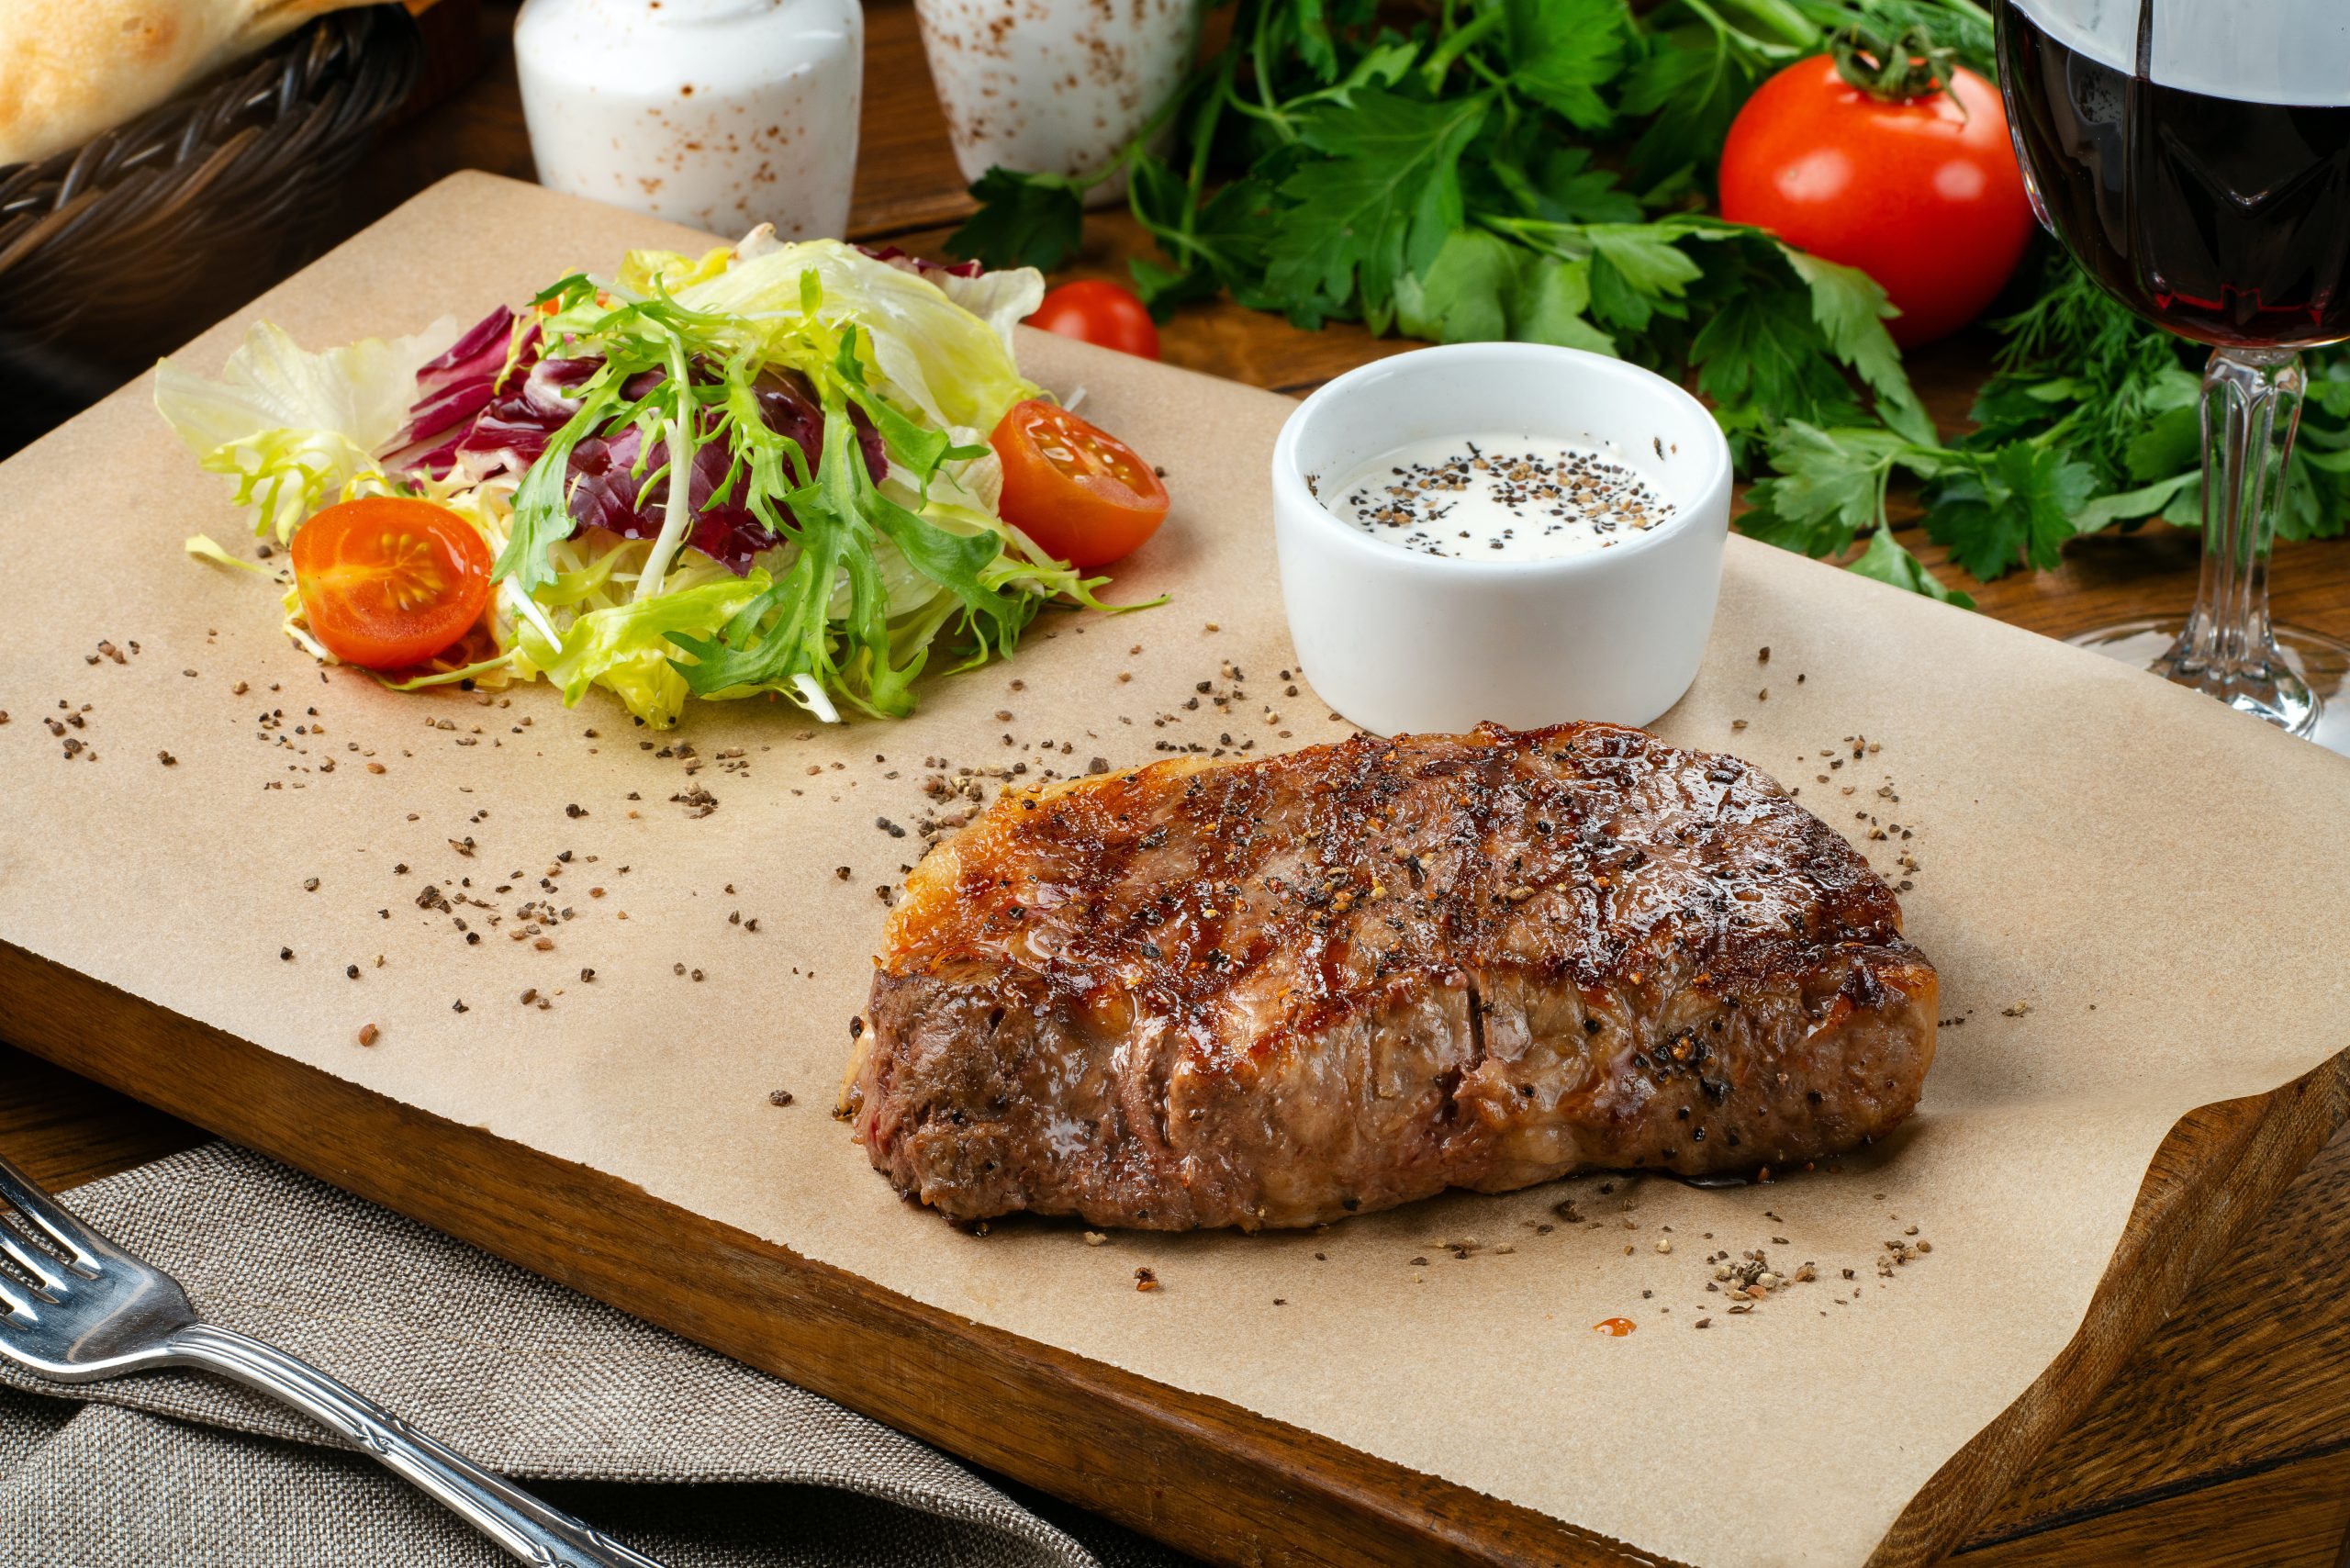 juicy, marinated meat with our kitchen gadget on a serving board with a dipping sauce and salad.